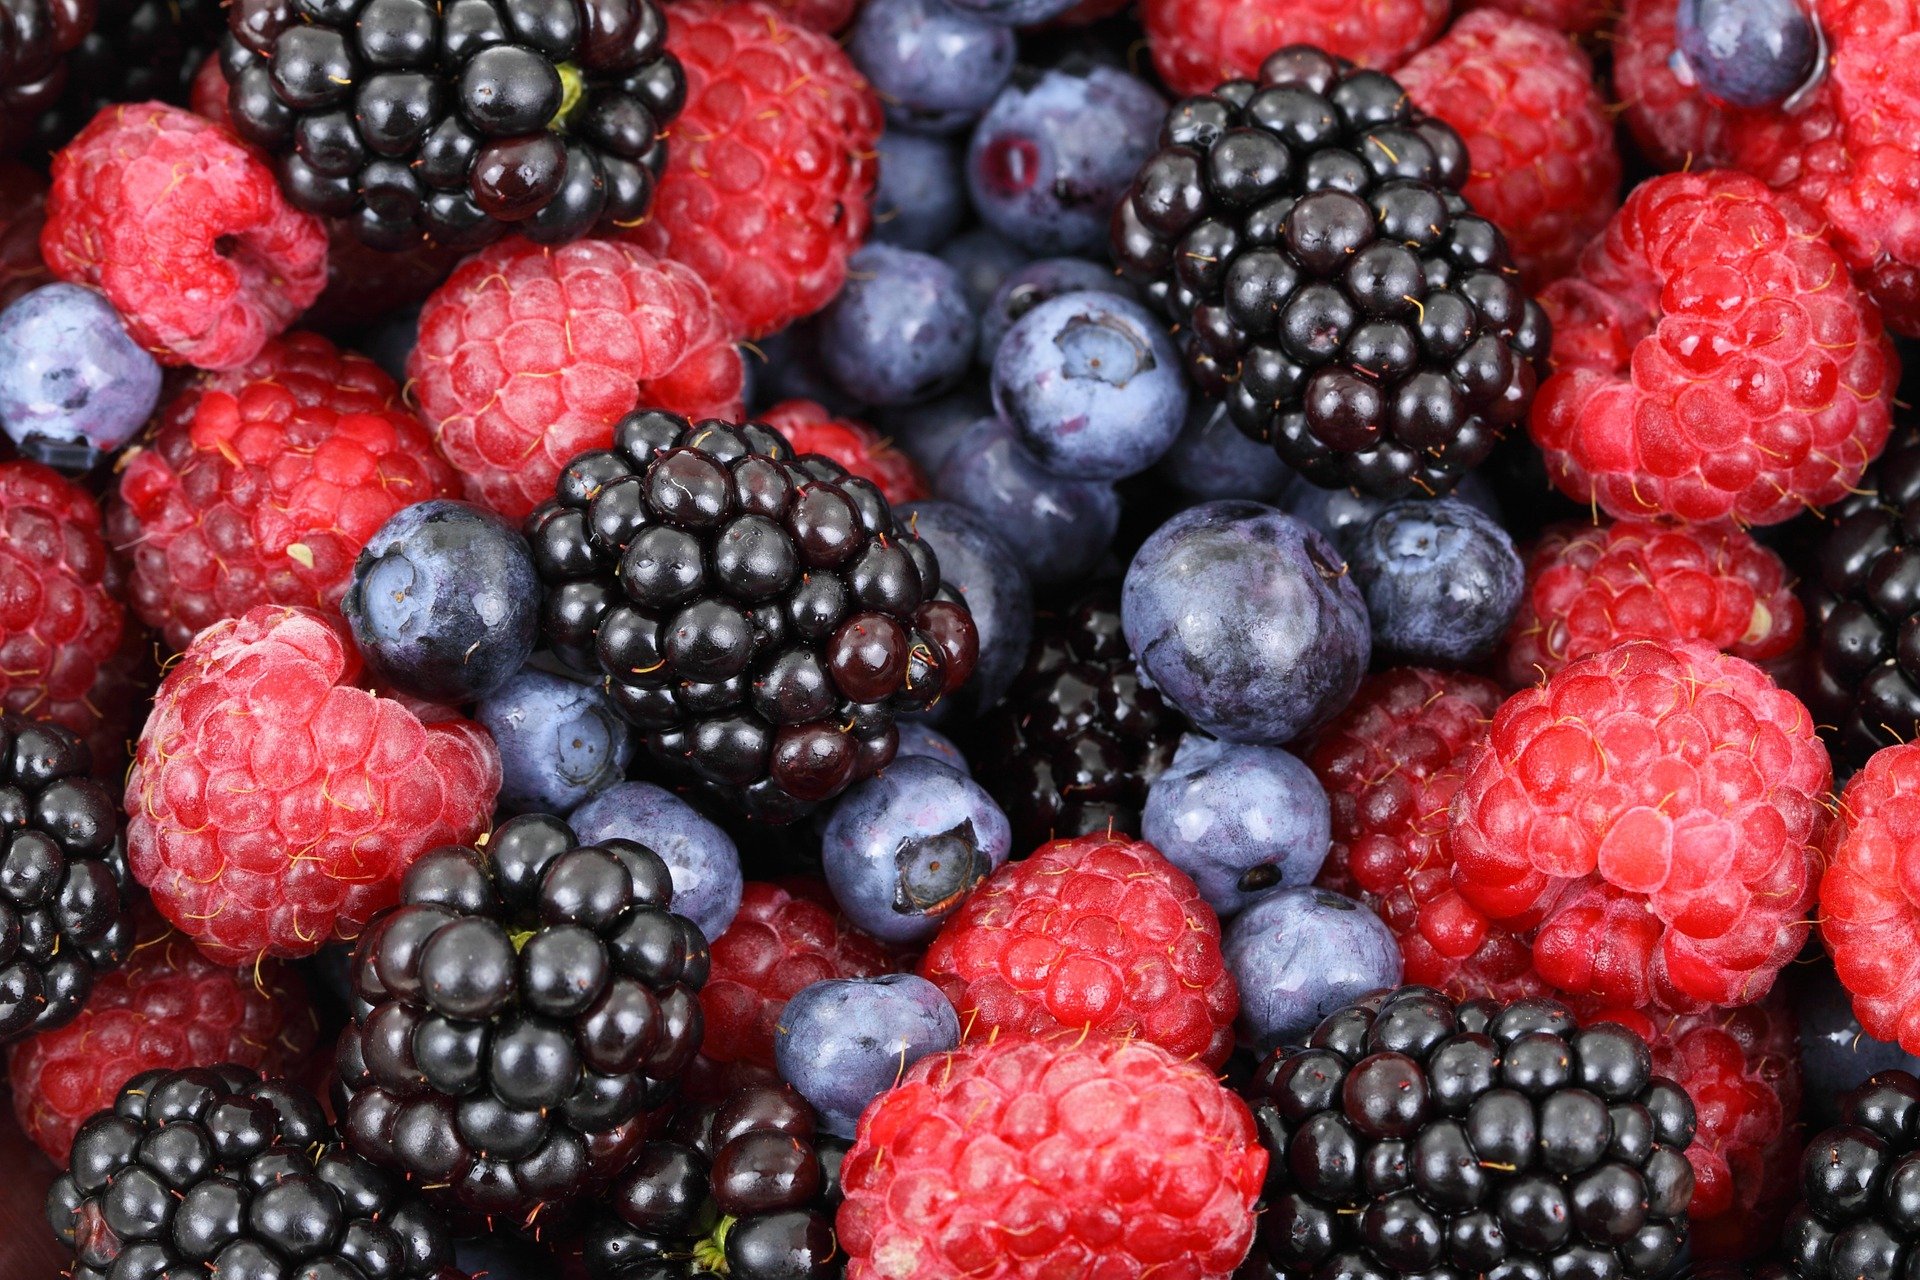 BEST BERRY FOR HIGH BLOOD SUGAR